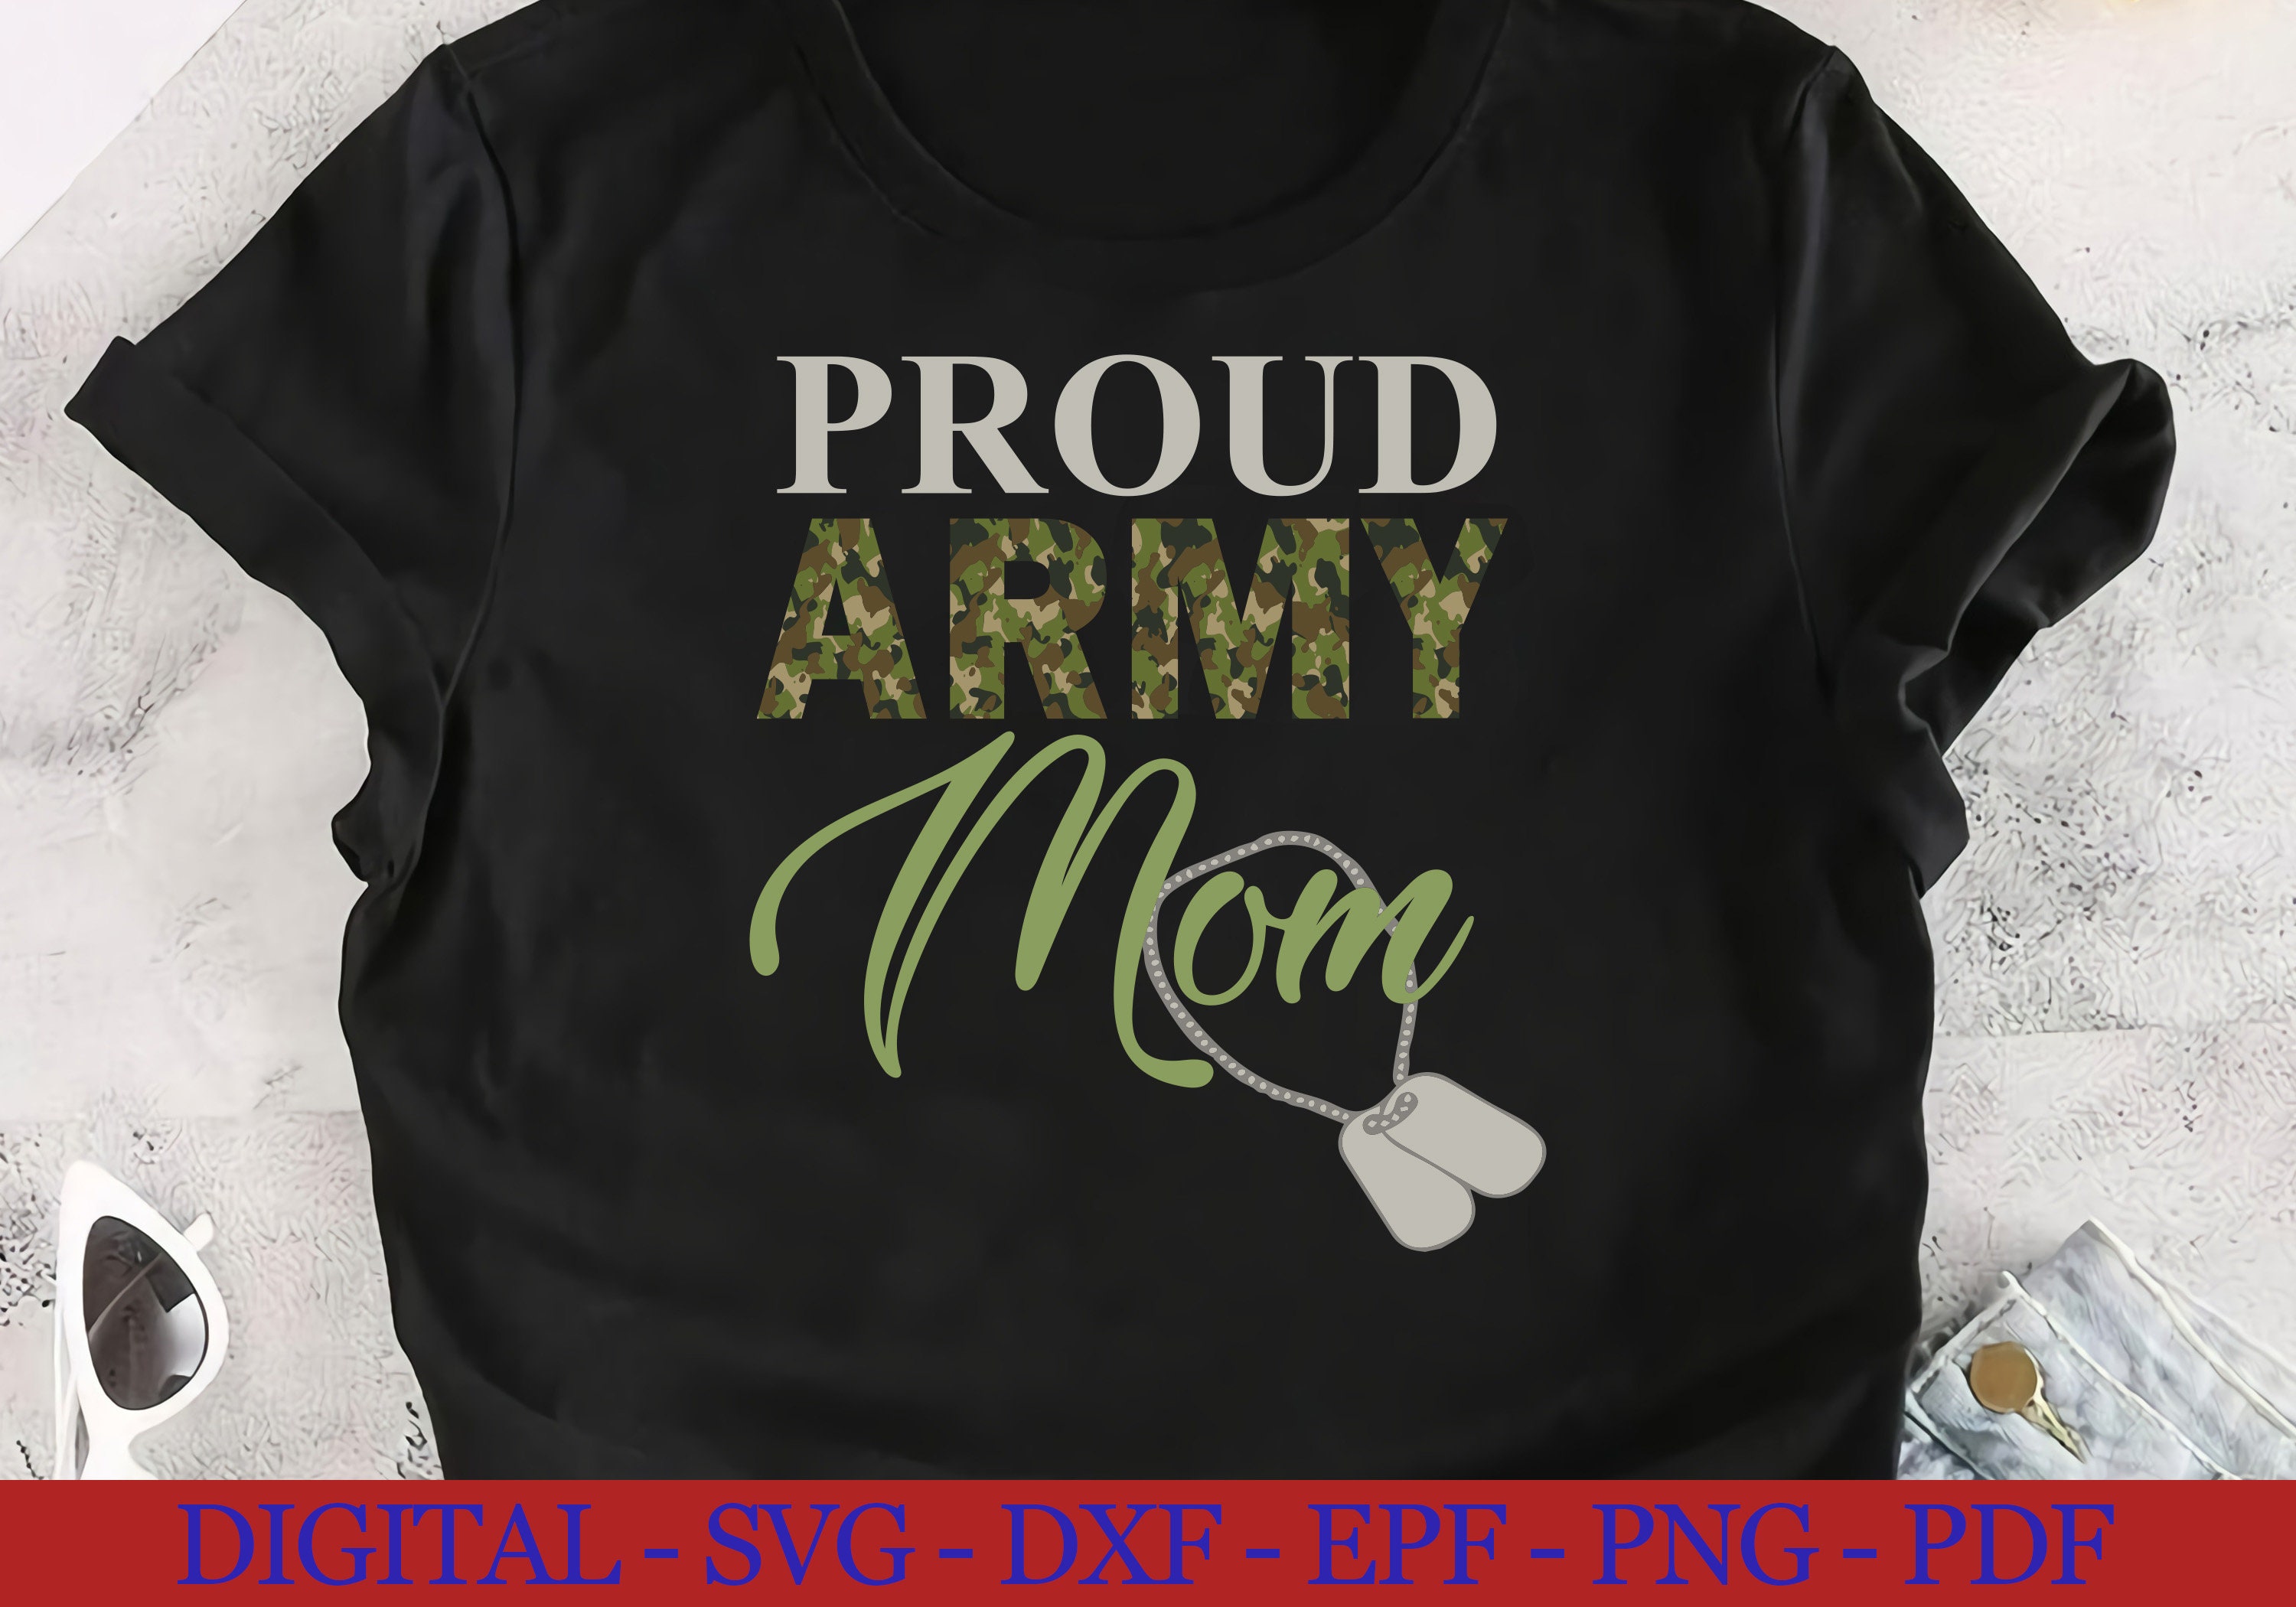 Download Proud Army Mom svg Design Army Parents svg Designs for | Etsy